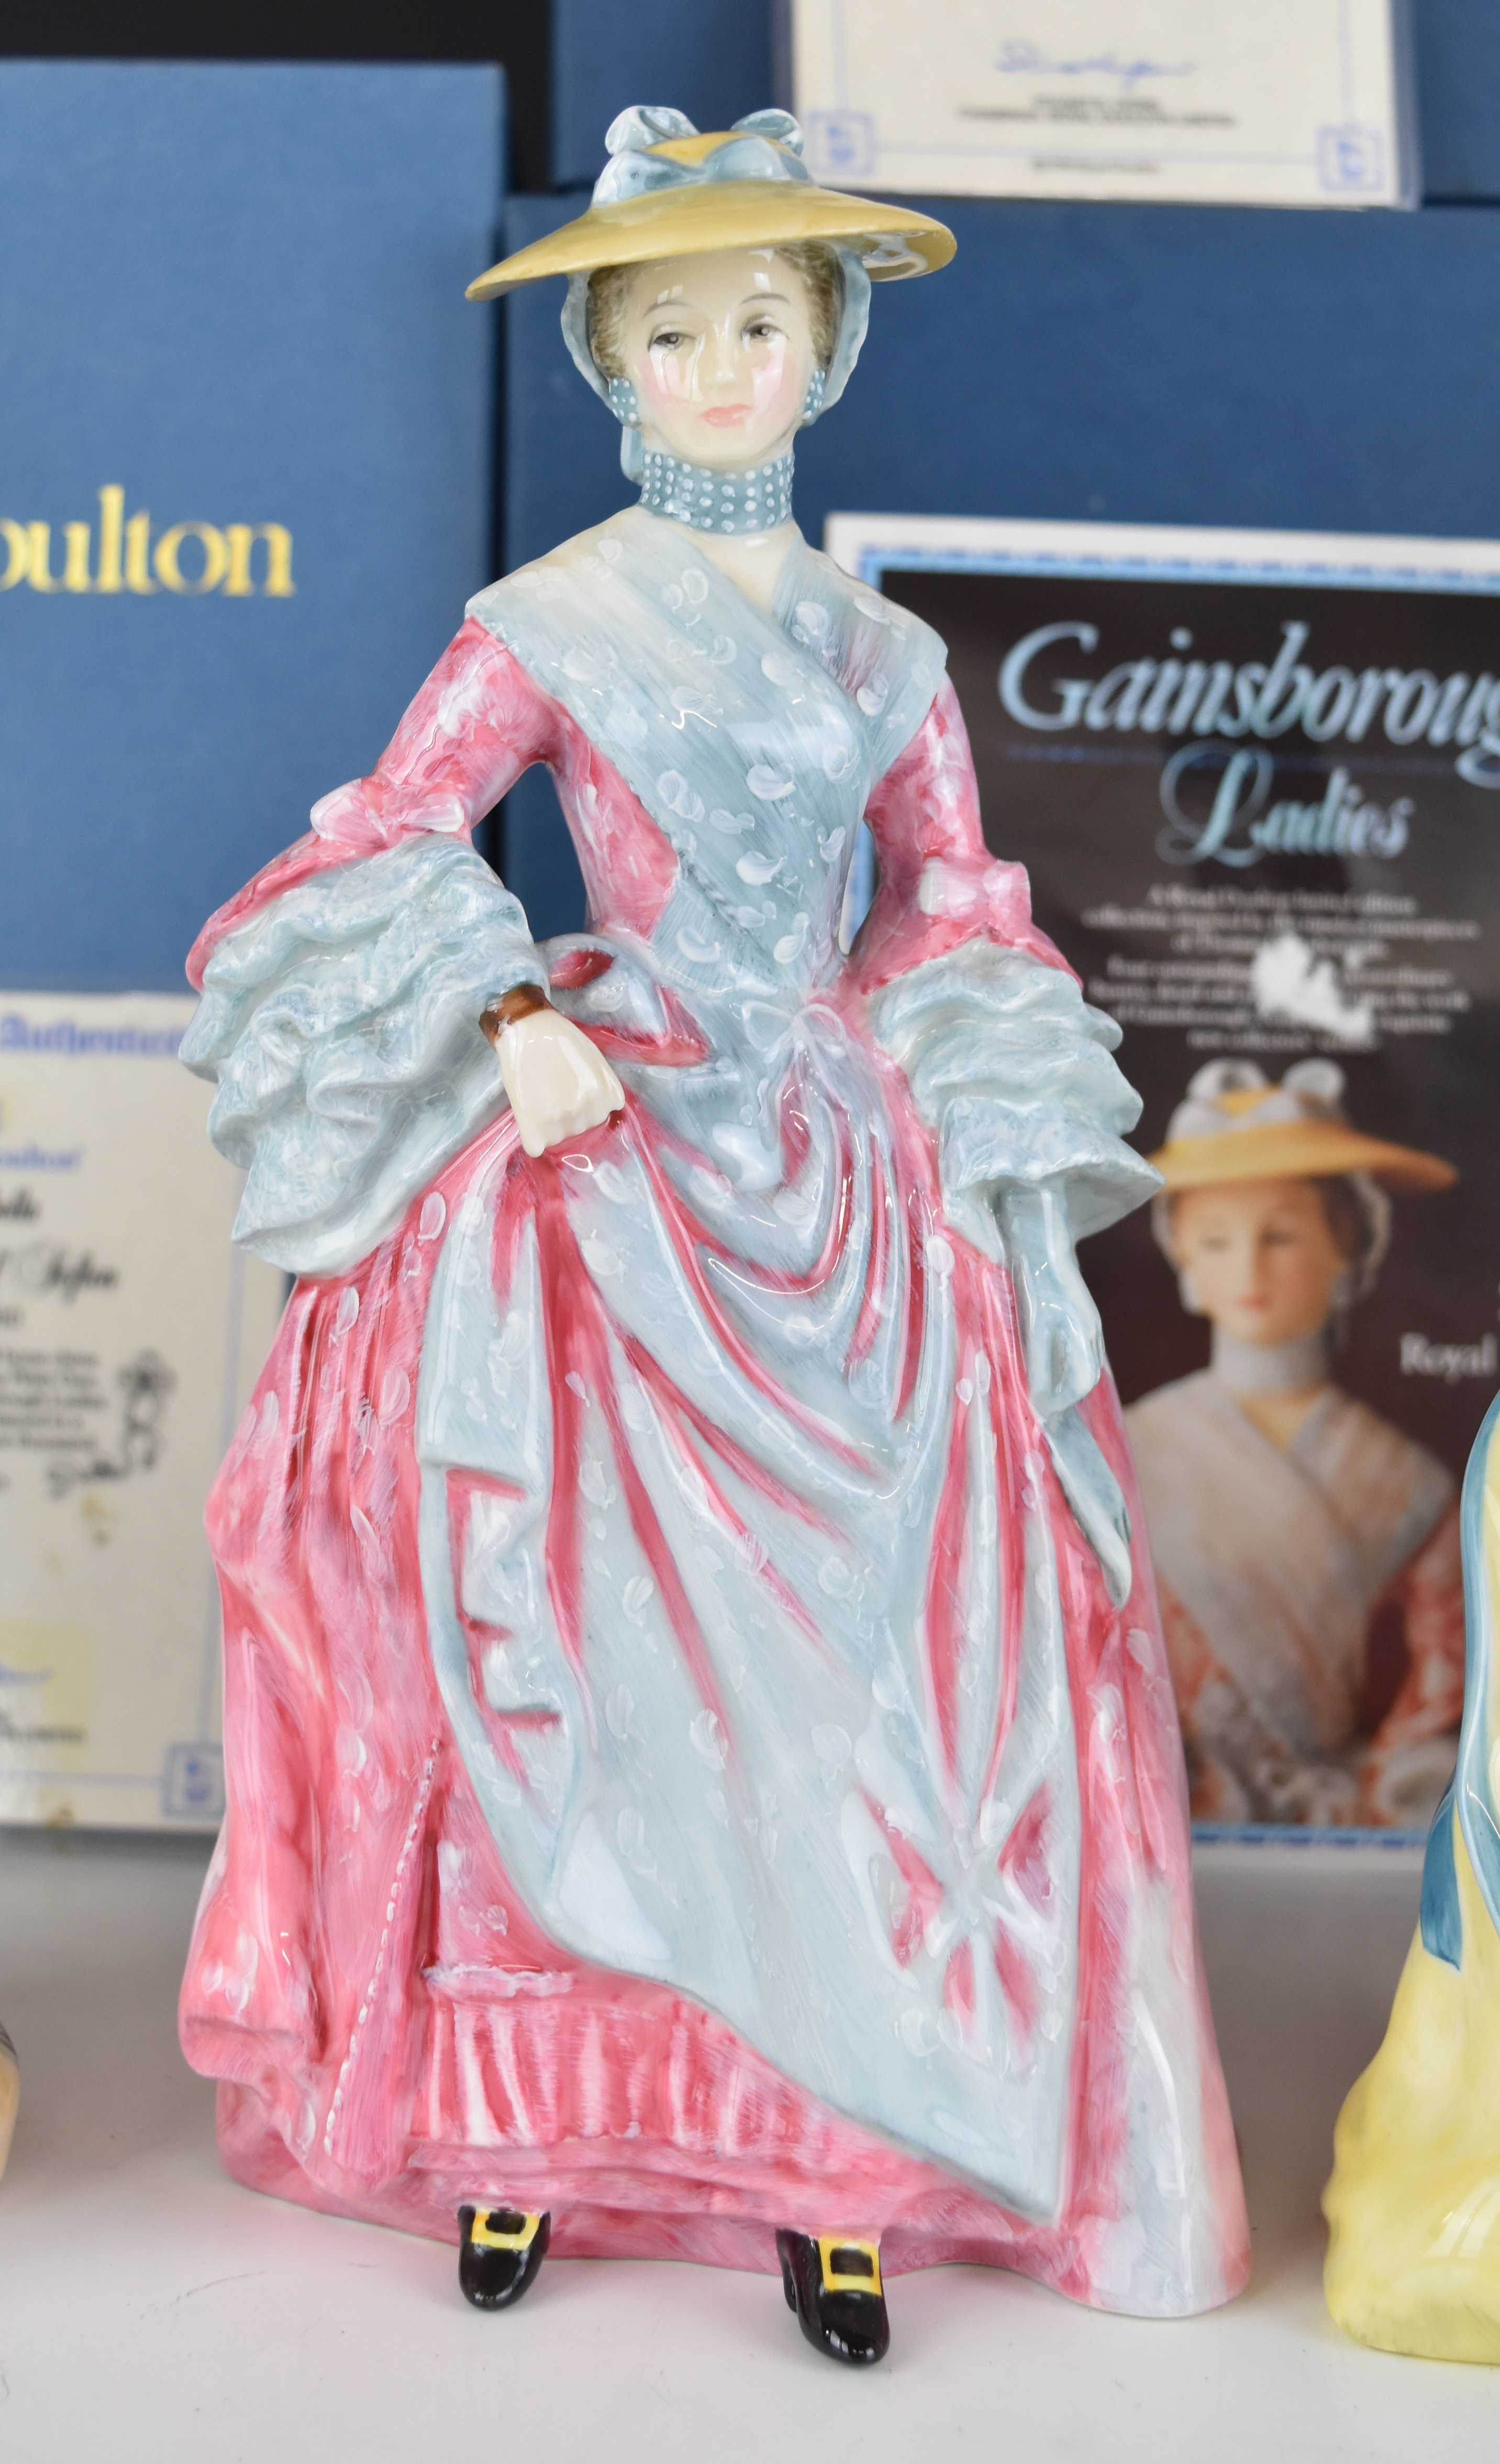 Four Royal Doulton limited edition figures from the Gainsborough Ladies series comprising Sophia - Image 4 of 14